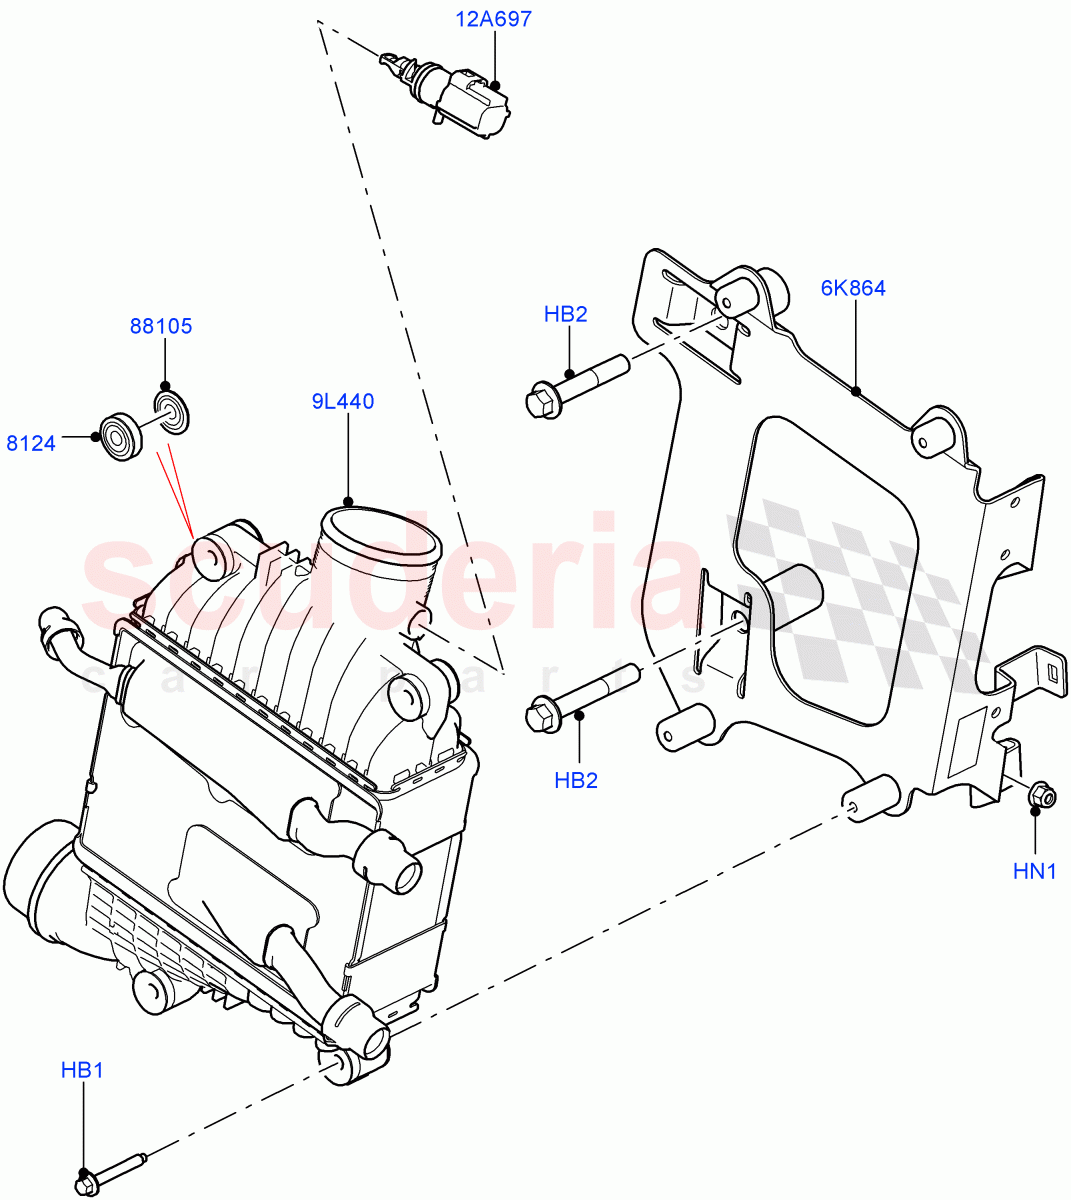 Intercooler/Air Ducts And Hoses(Nitra Plant Build)(2.0L I4 DSL MID DOHC AJ200,2.0L I4 DSL HIGH DOHC AJ200)((V)FROMK2000001) of Land Rover Land Rover Discovery 5 (2017+) [2.0 Turbo Diesel]